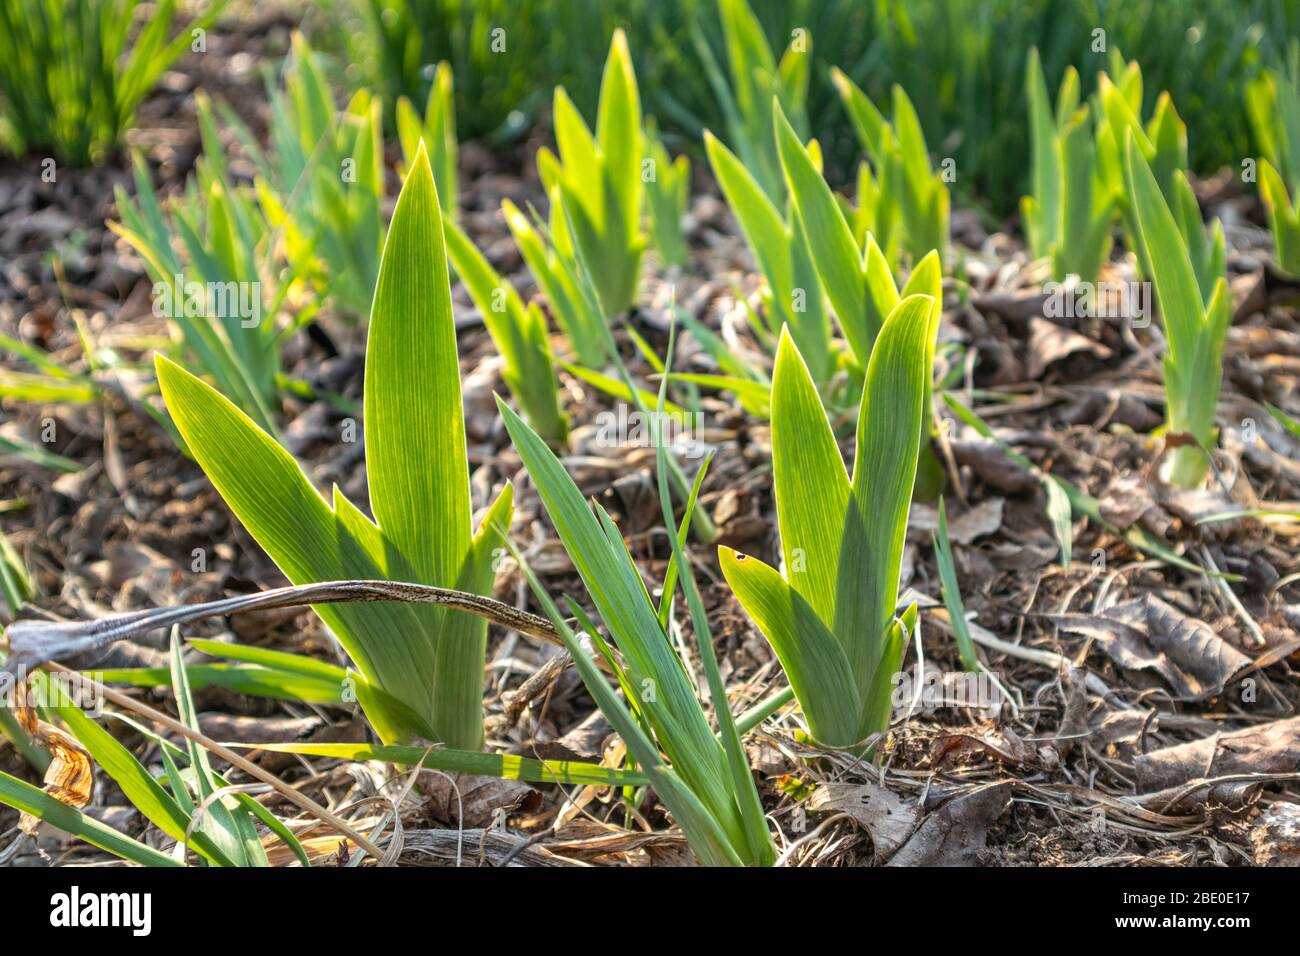 Green young flower leaves growing in garden. Spring sunny development growth Stock Photo